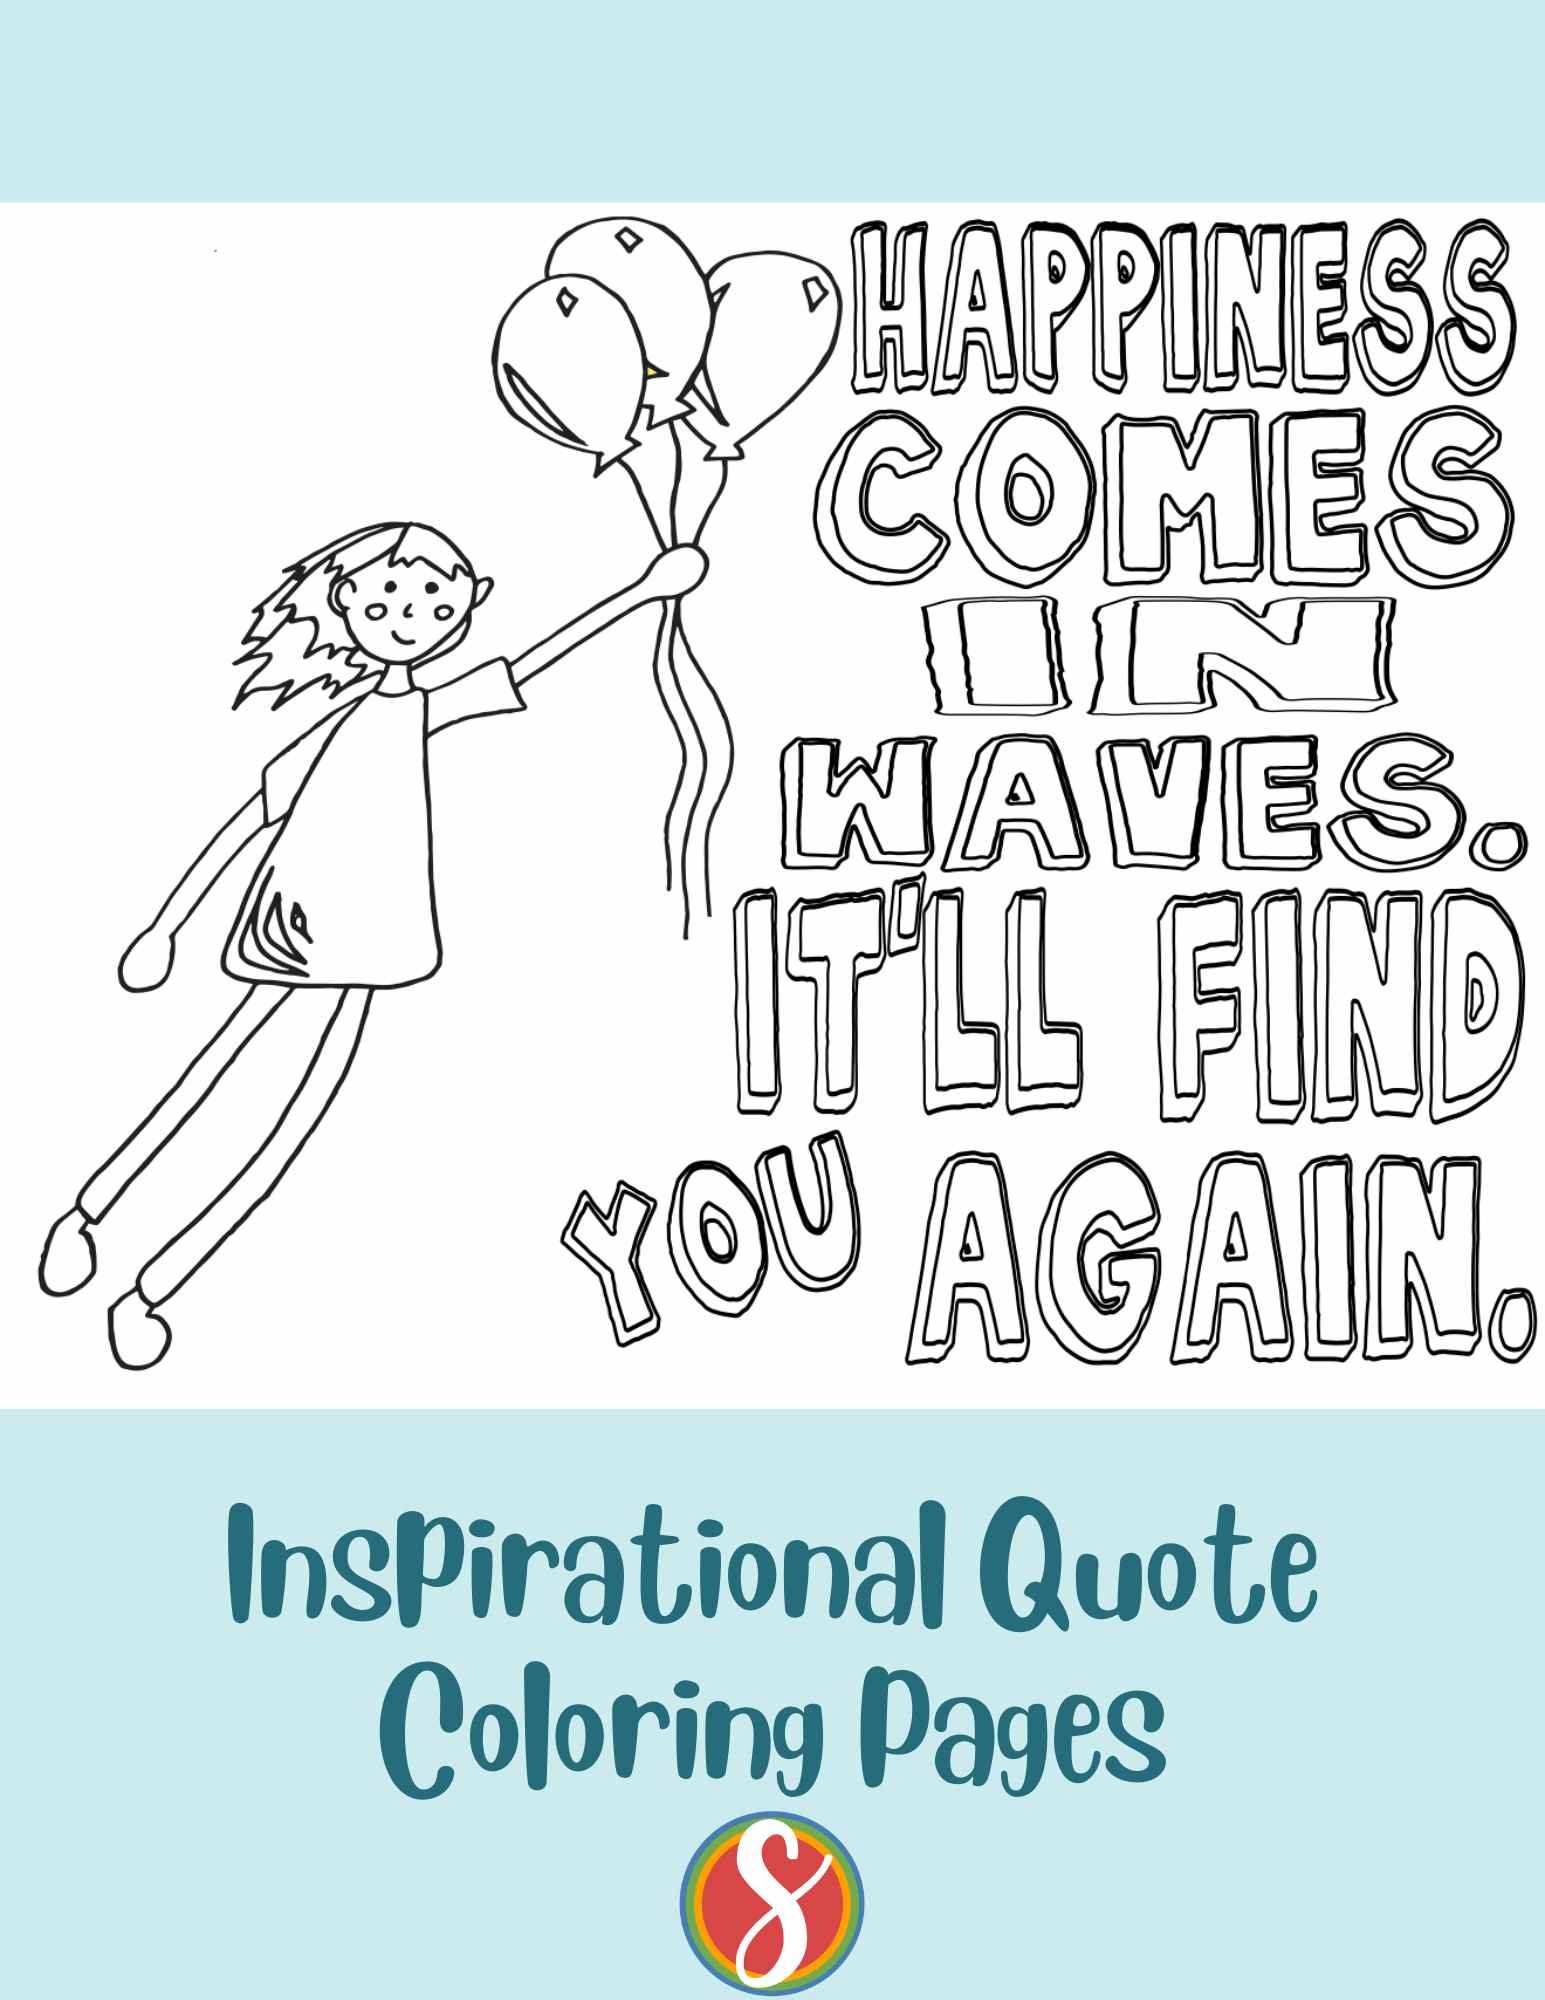 a girl floating away on balloons to color and colorable text "Happiness comes in waves. It'll find you again."